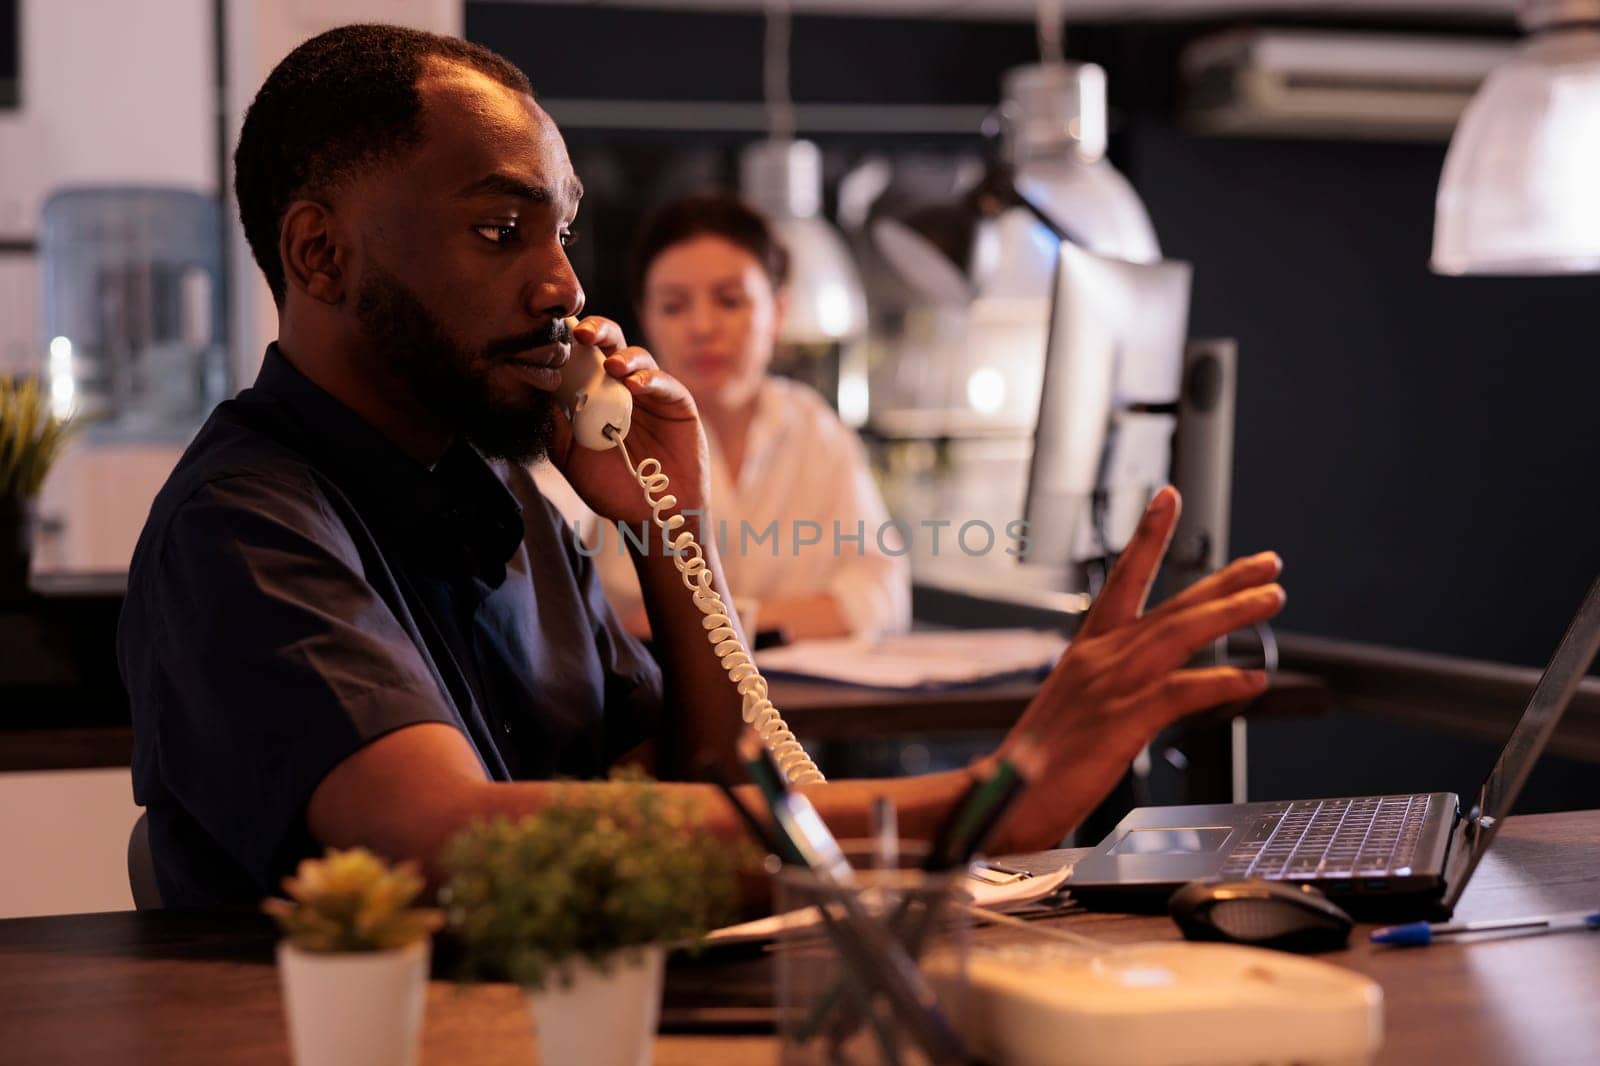 Worker discussing business plan with teamlead on landline phone by DCStudio